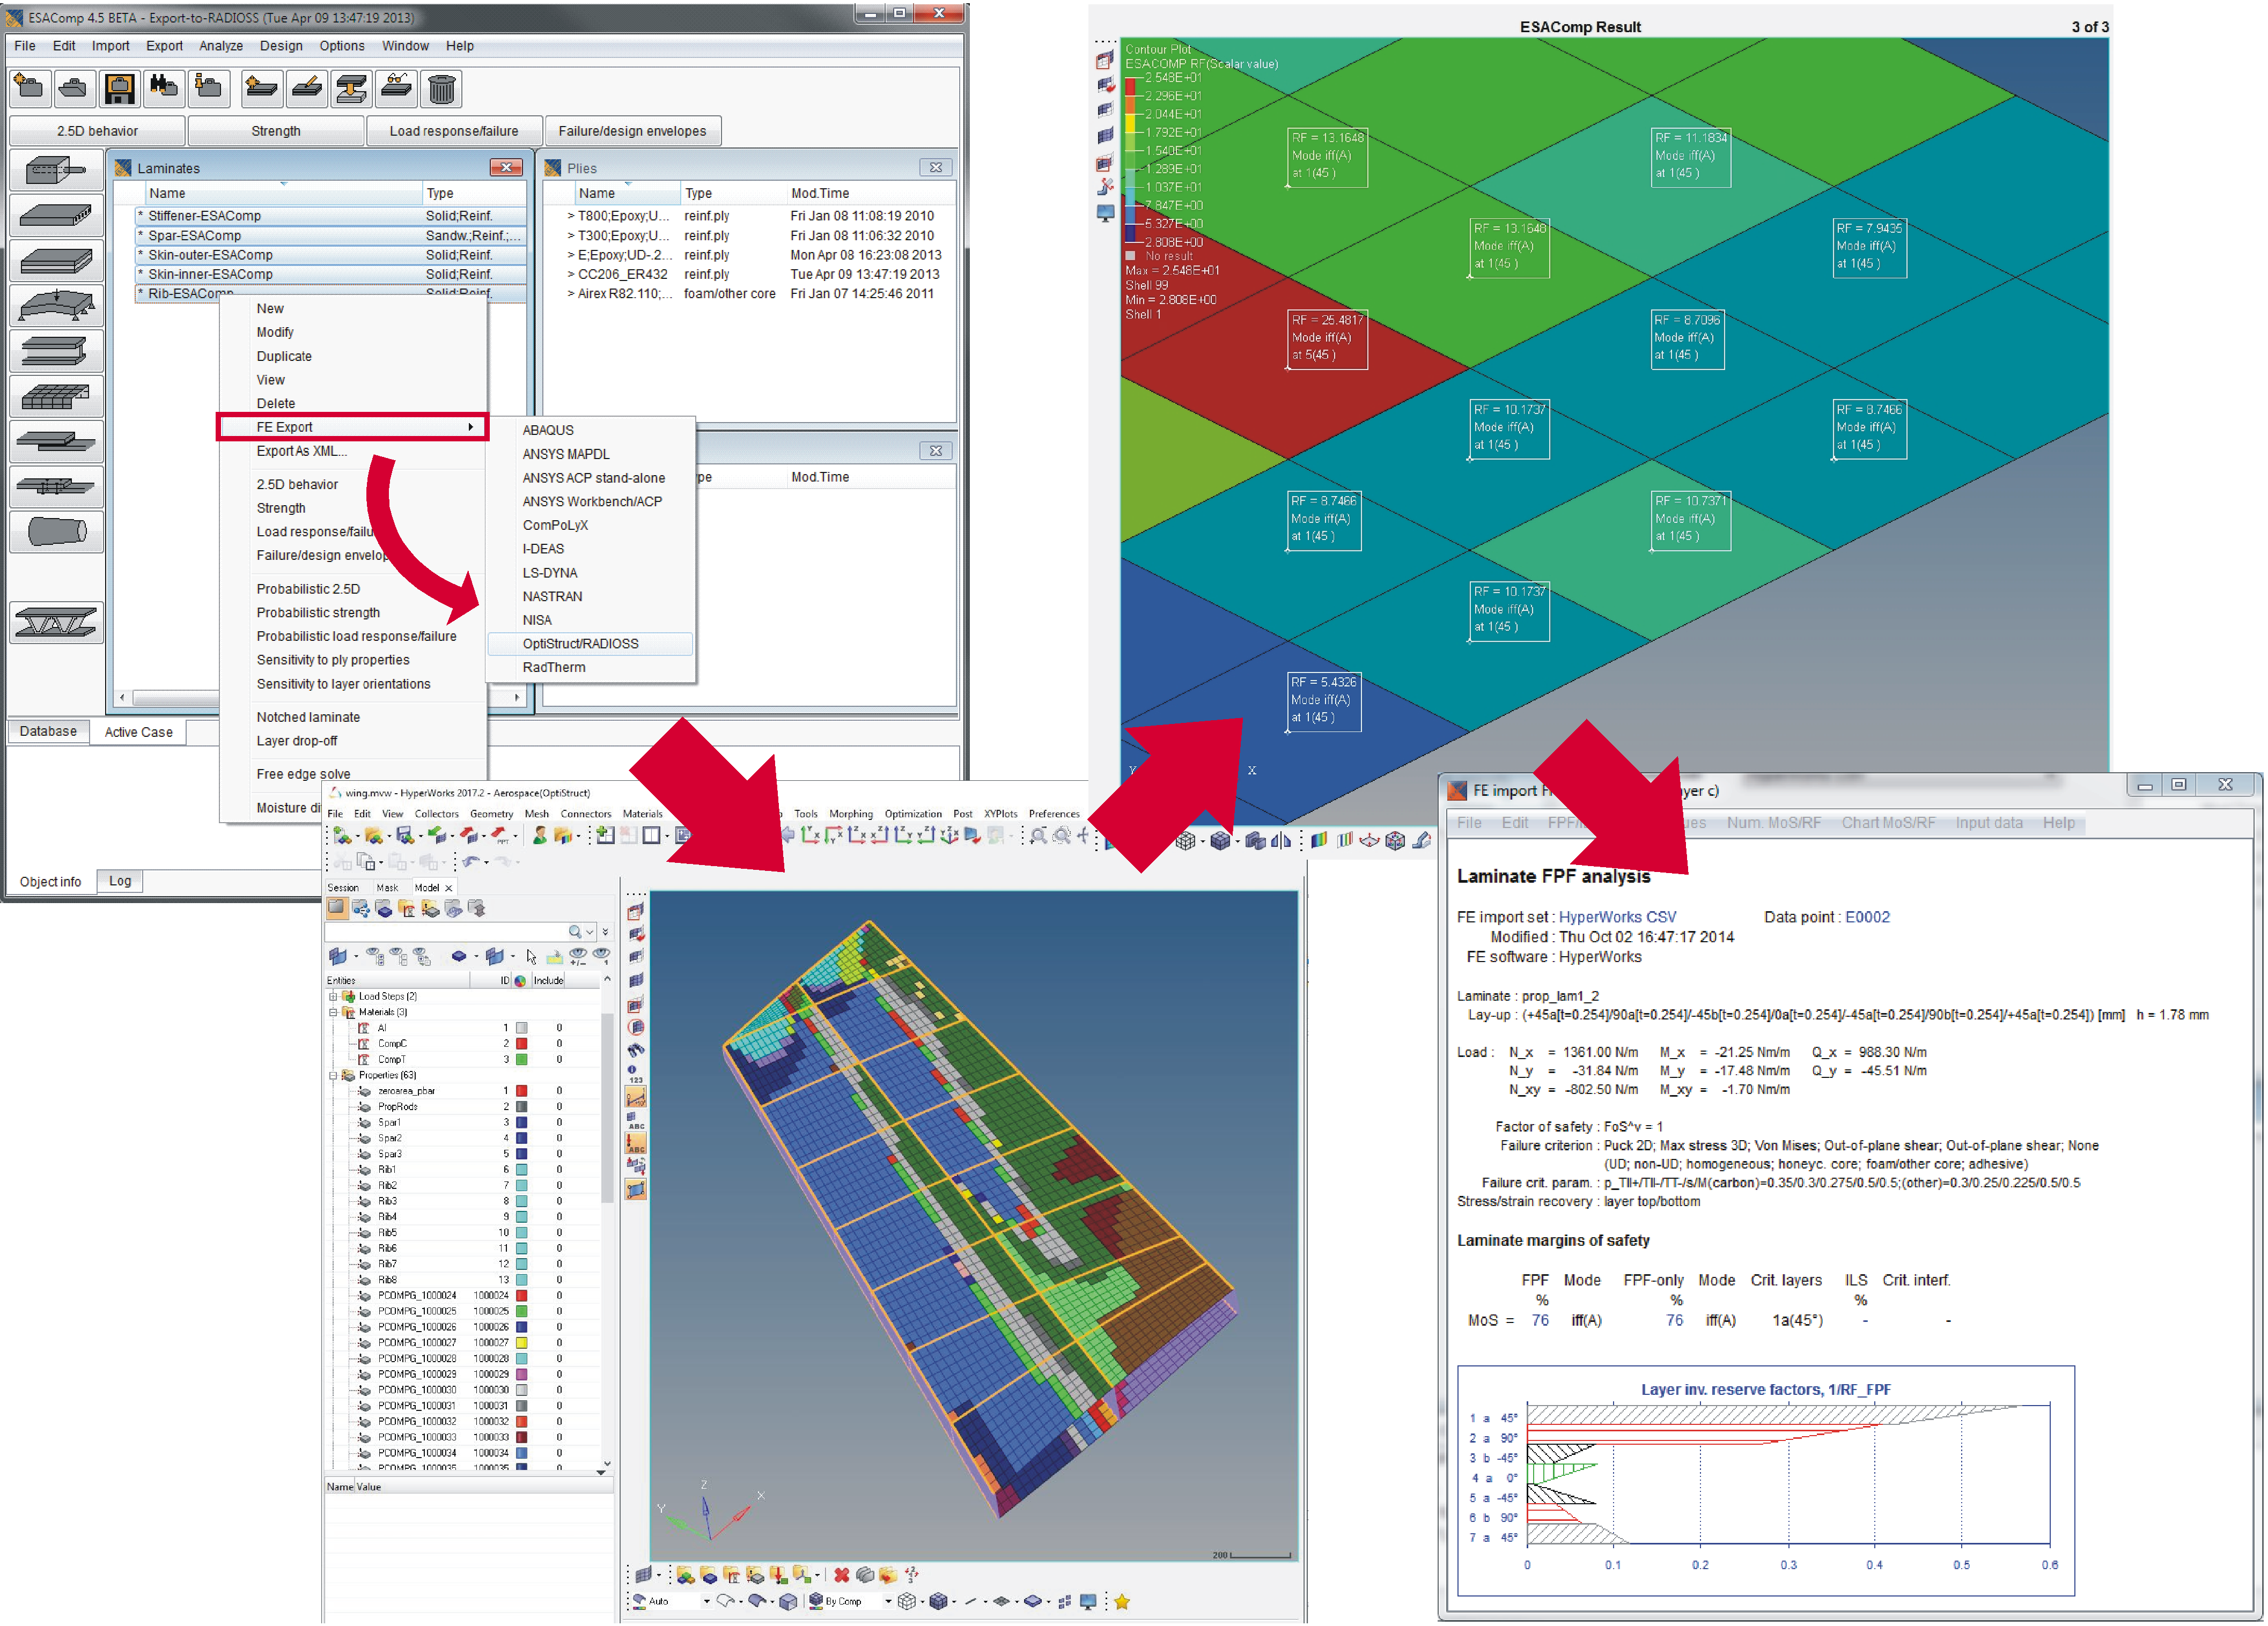 ESAComp interfaces with Altair’s HyperWorks software for pre and post-processing.